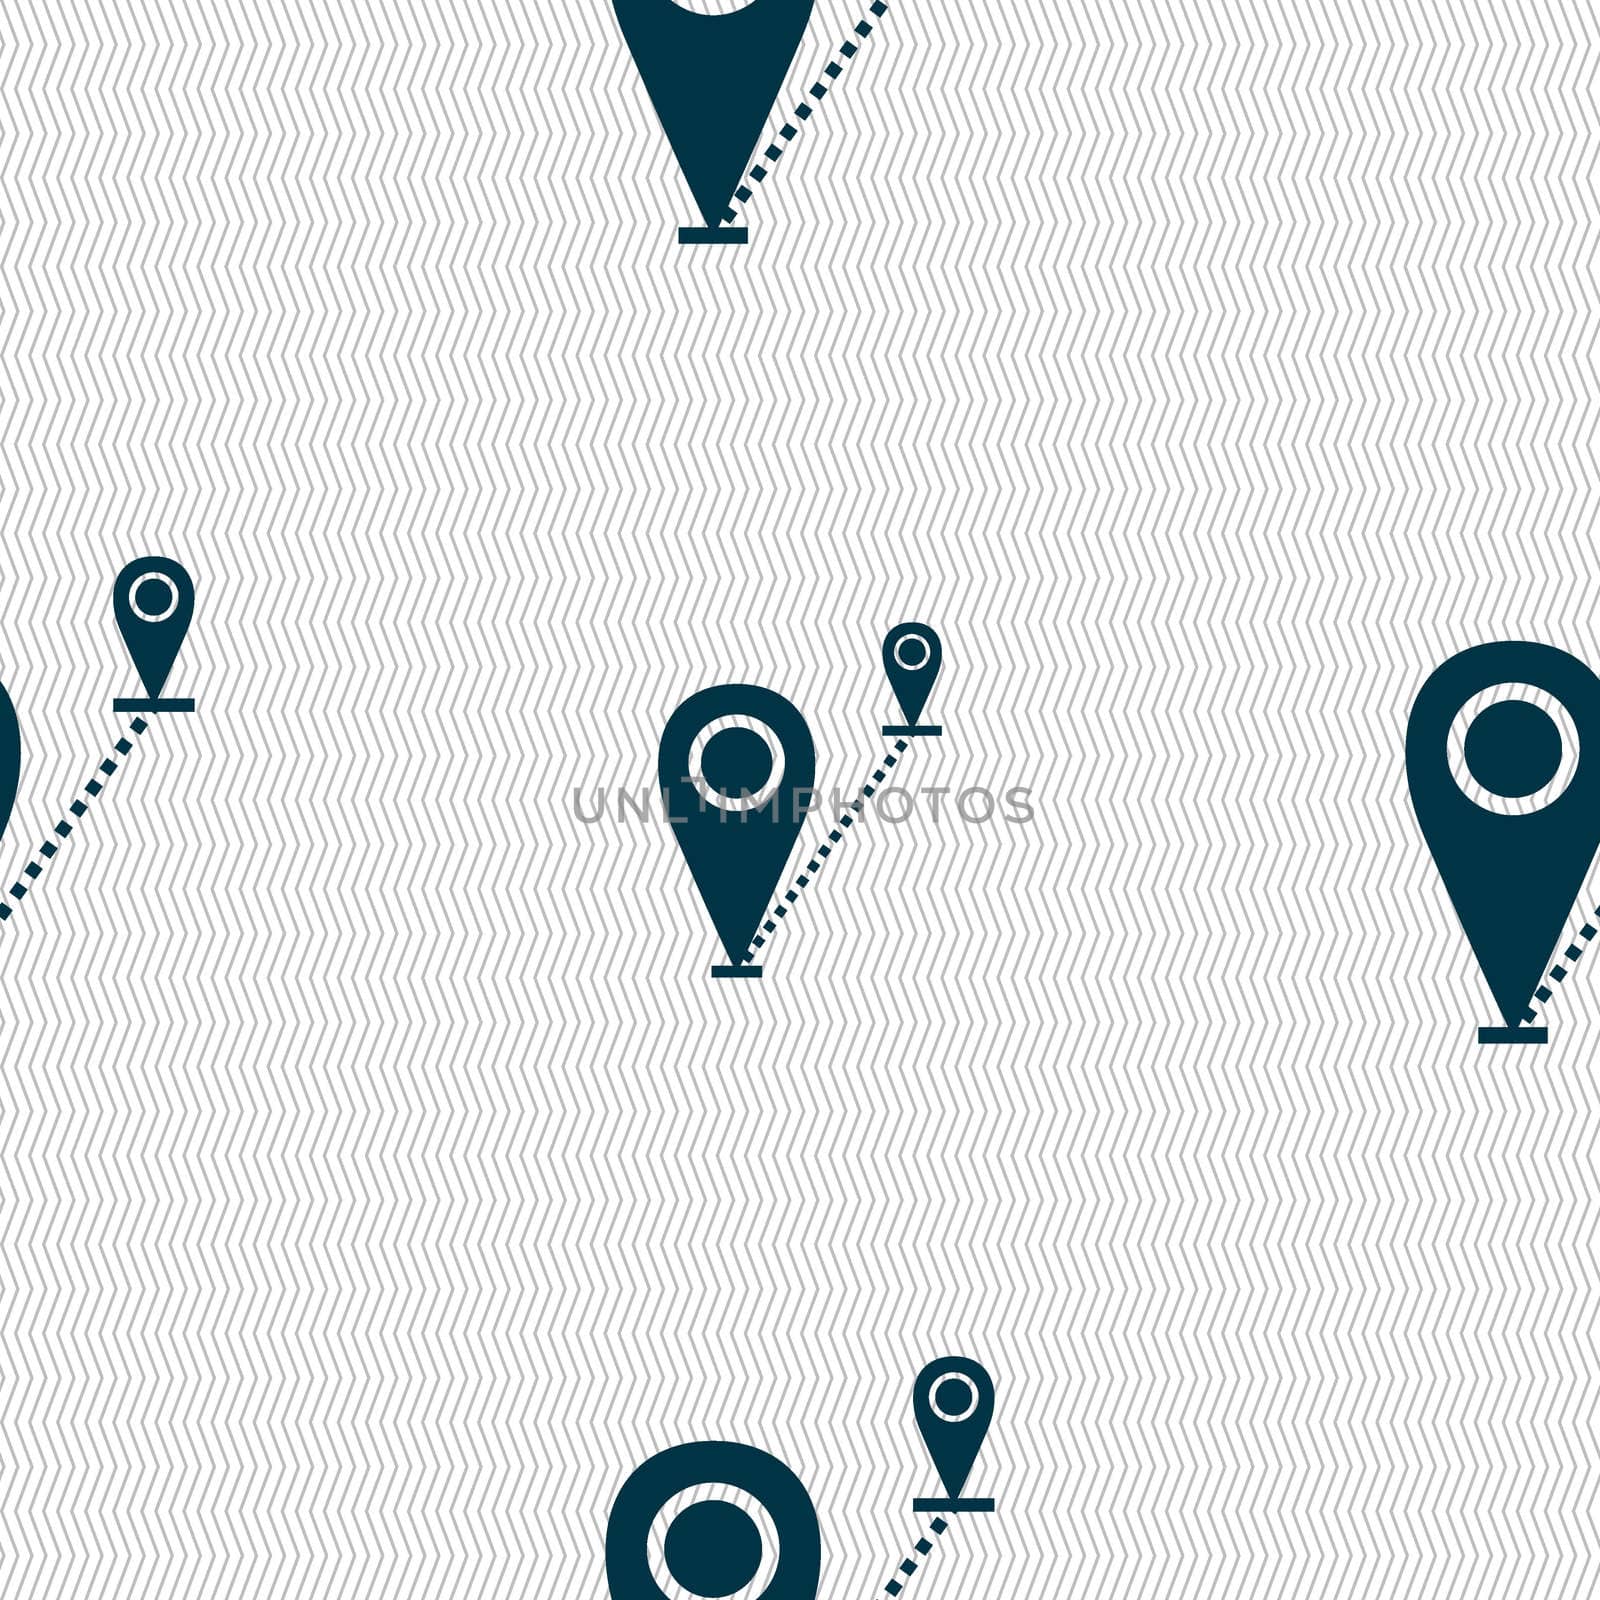 Map pointer icon sign. Seamless abstract background with geometric shapes. illustration